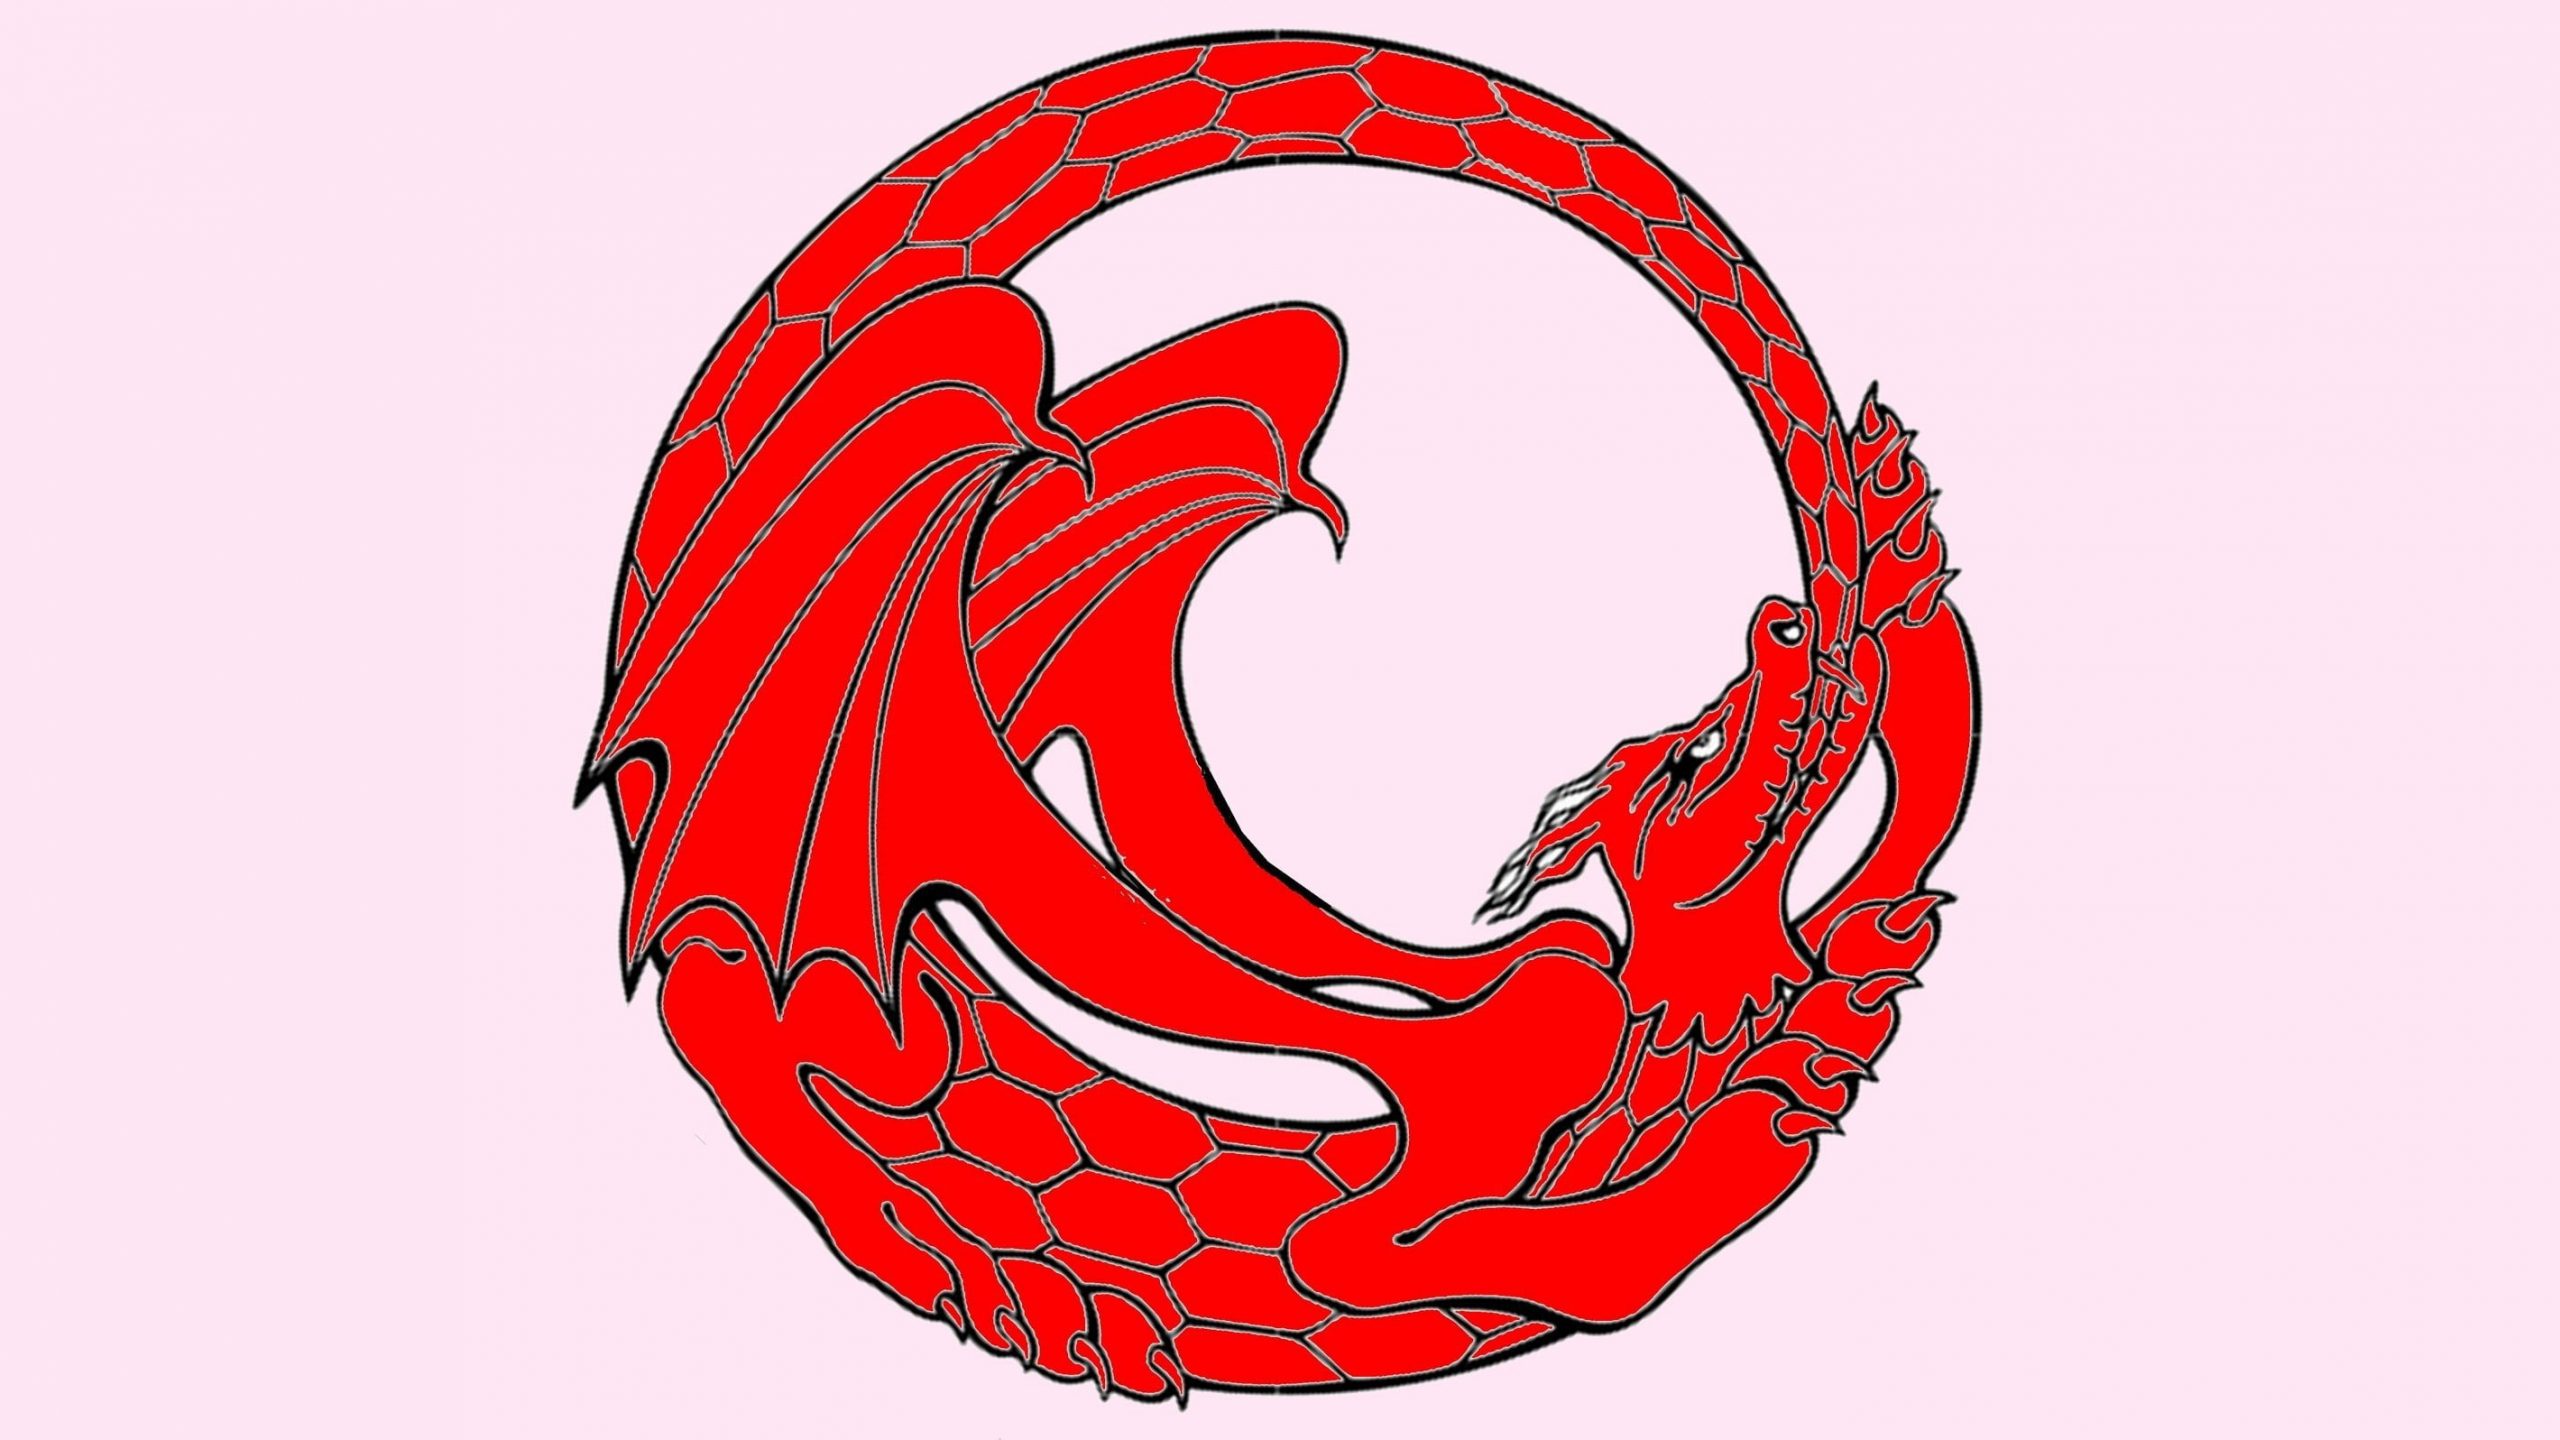 Wallpaper Ouroboros, Red, Art And Craft - Wallpaperforu